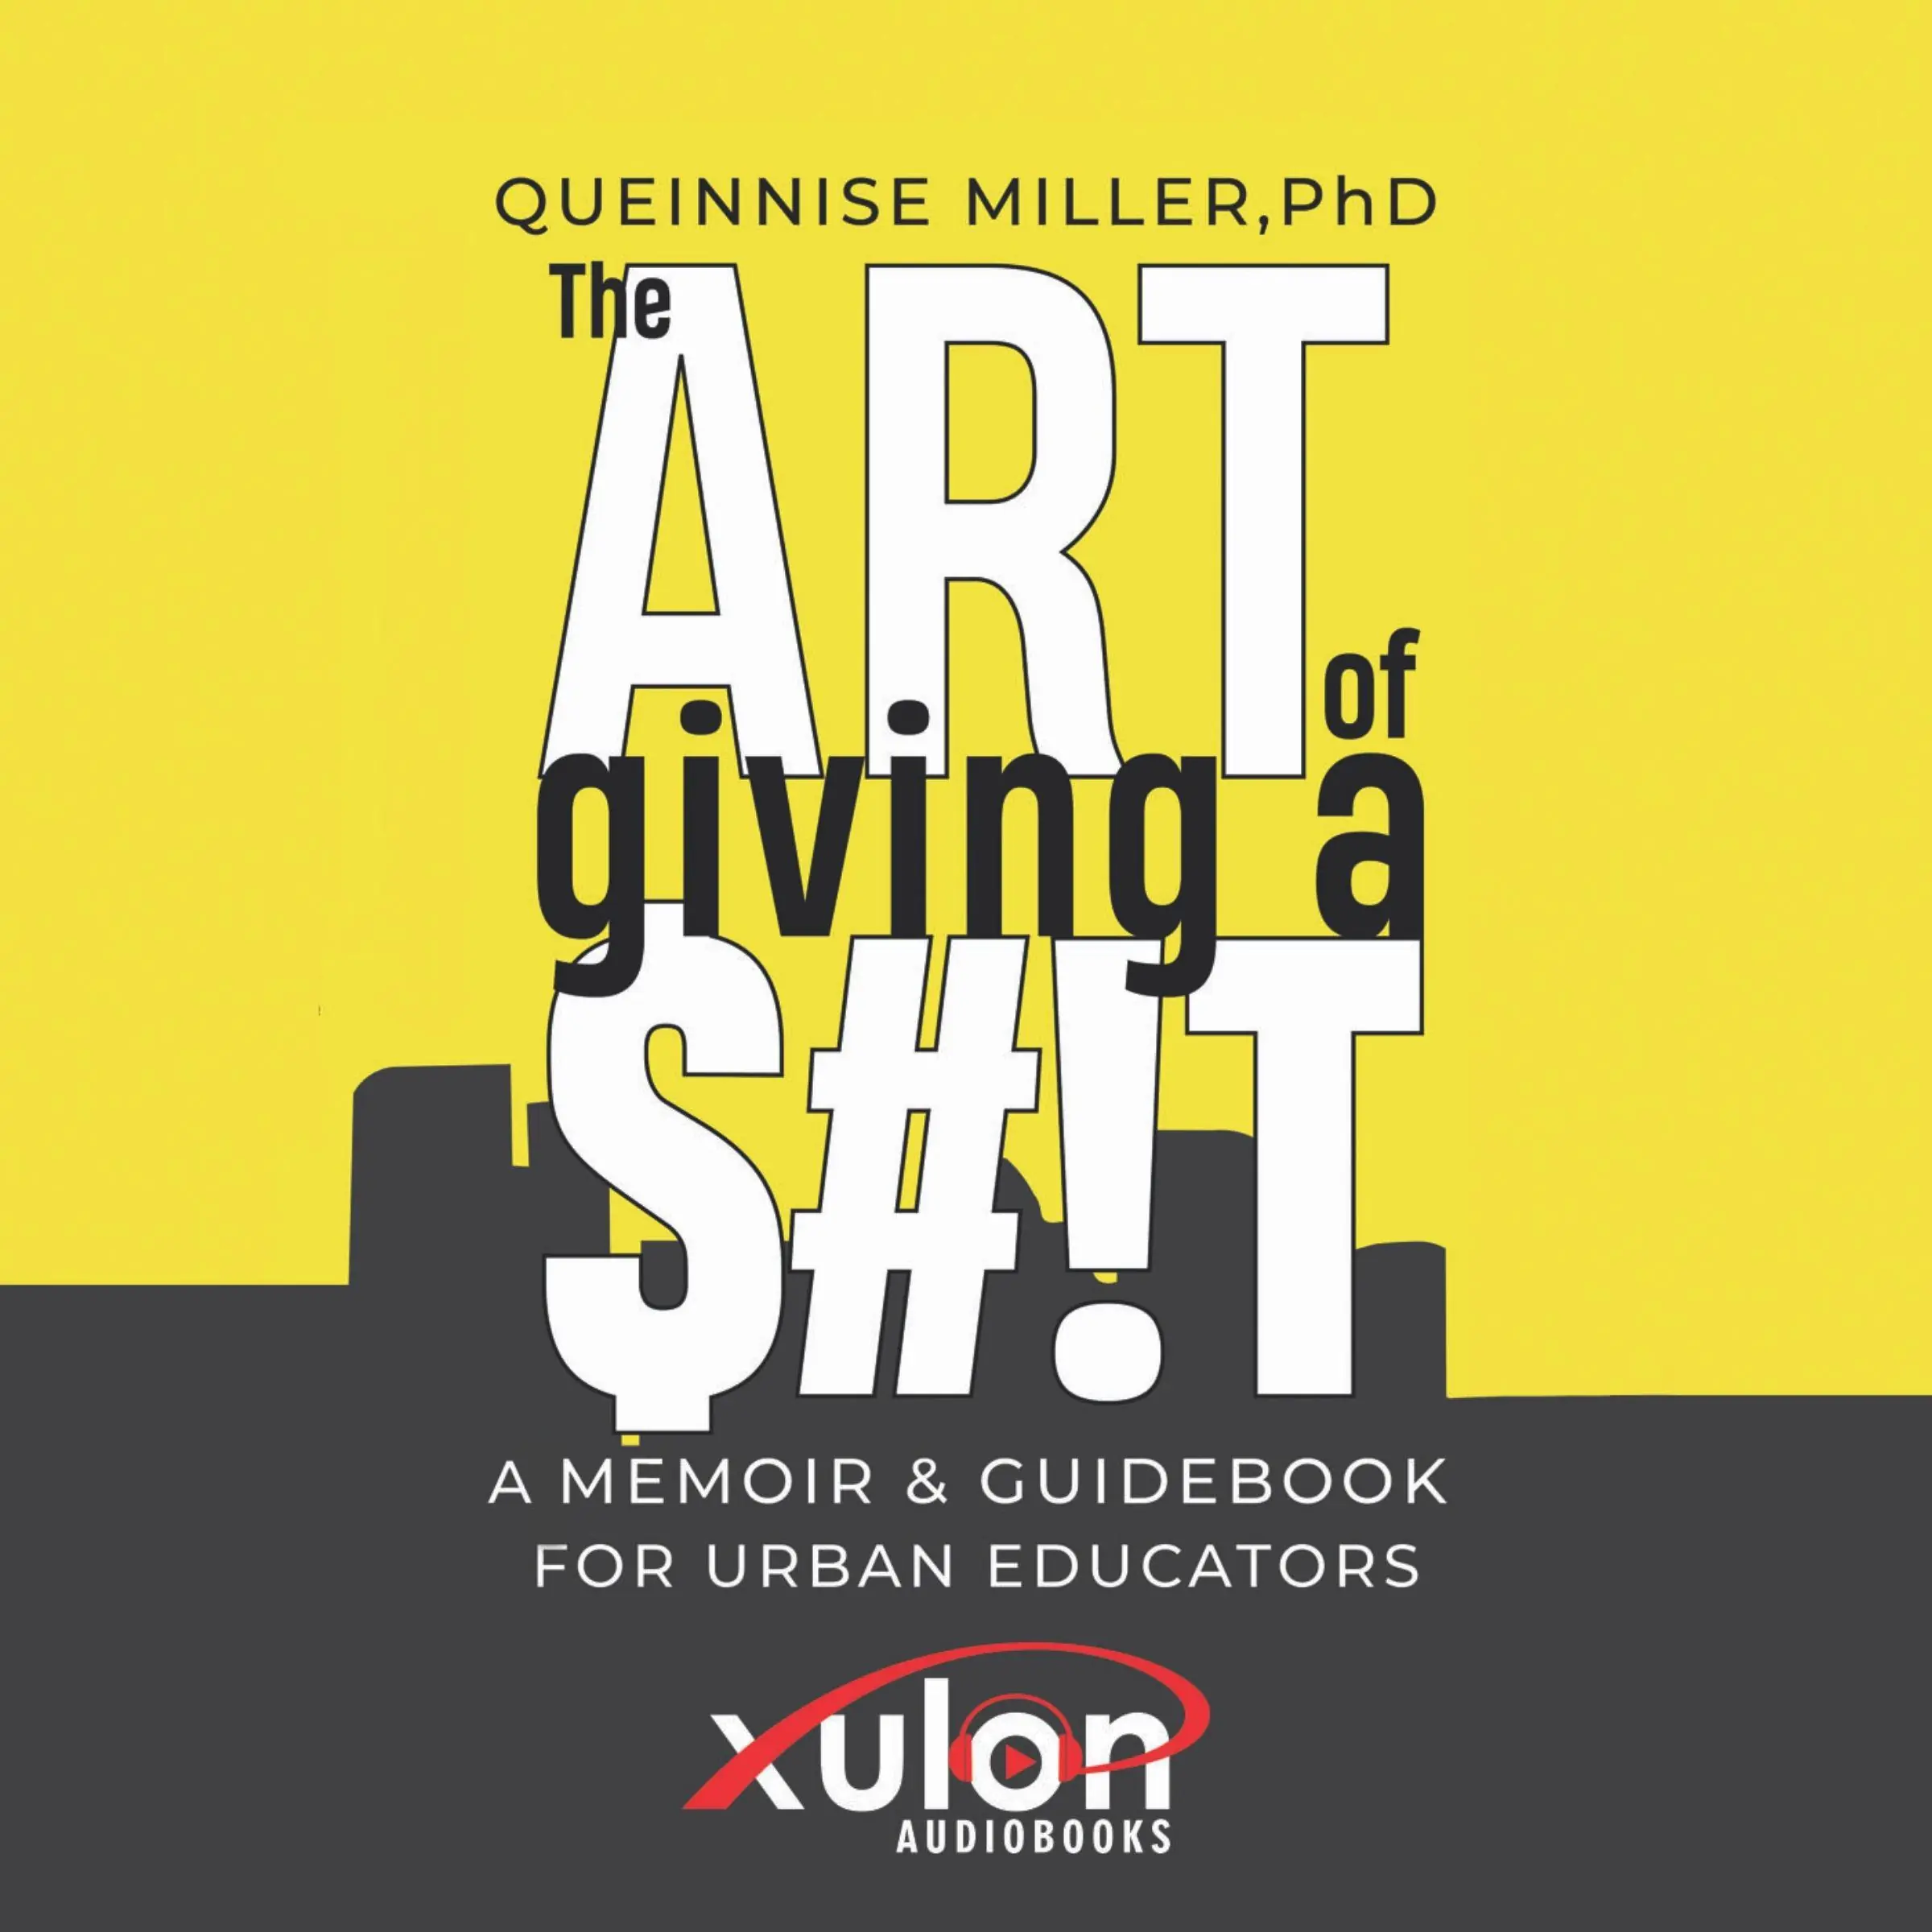 The Art of Giving a $#!T Audiobook by Queinnise Miller PhD